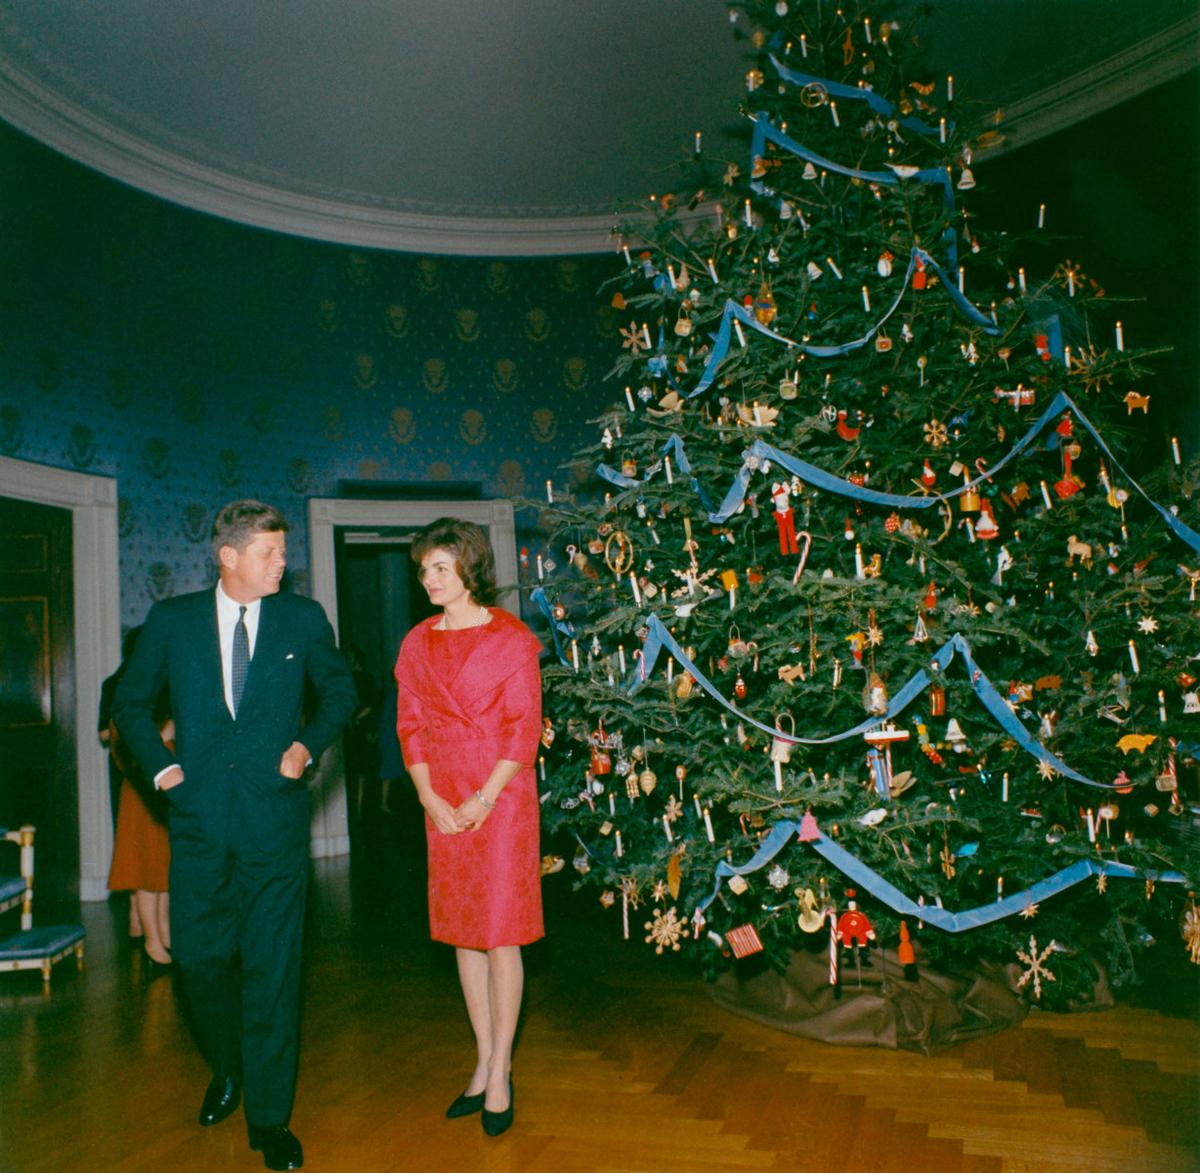 First lady Jacqueline Kennedy and her “Nutcracker Suite” themed Christmas tree, 1961, featuring ornamental toys, birds, and angels modeled after Tchaikovsky's "Nutcracker" ballet. (Robert Knudsen/John F. Kennedy Presidential Library and Museum)